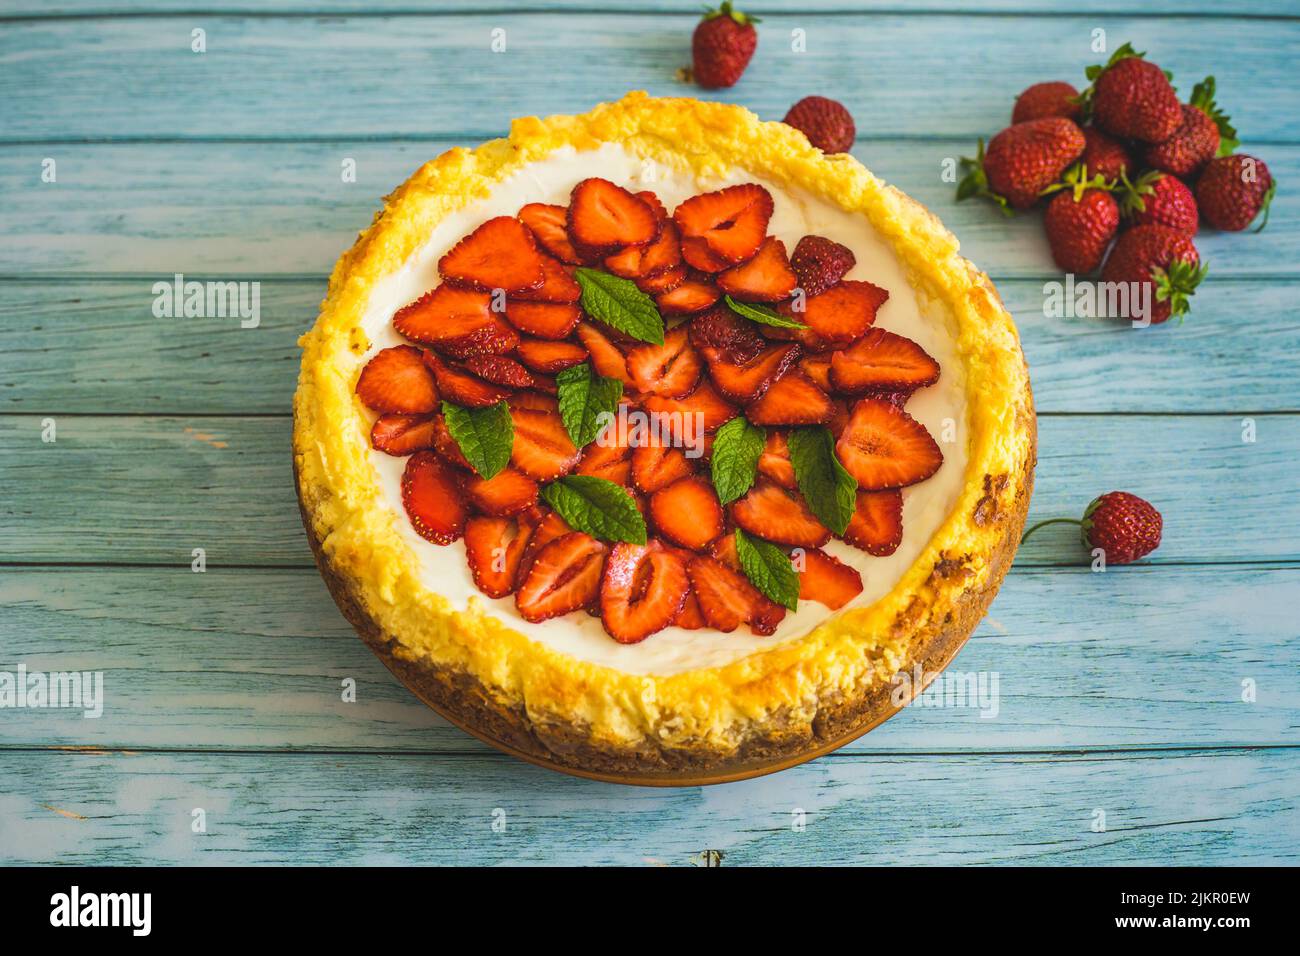 Strawberry homemade cake on wooden table.Delicious cheesecake with strawberries decorated with mint leaves.Top view.Healthy organic summer berry desse Stock Photo